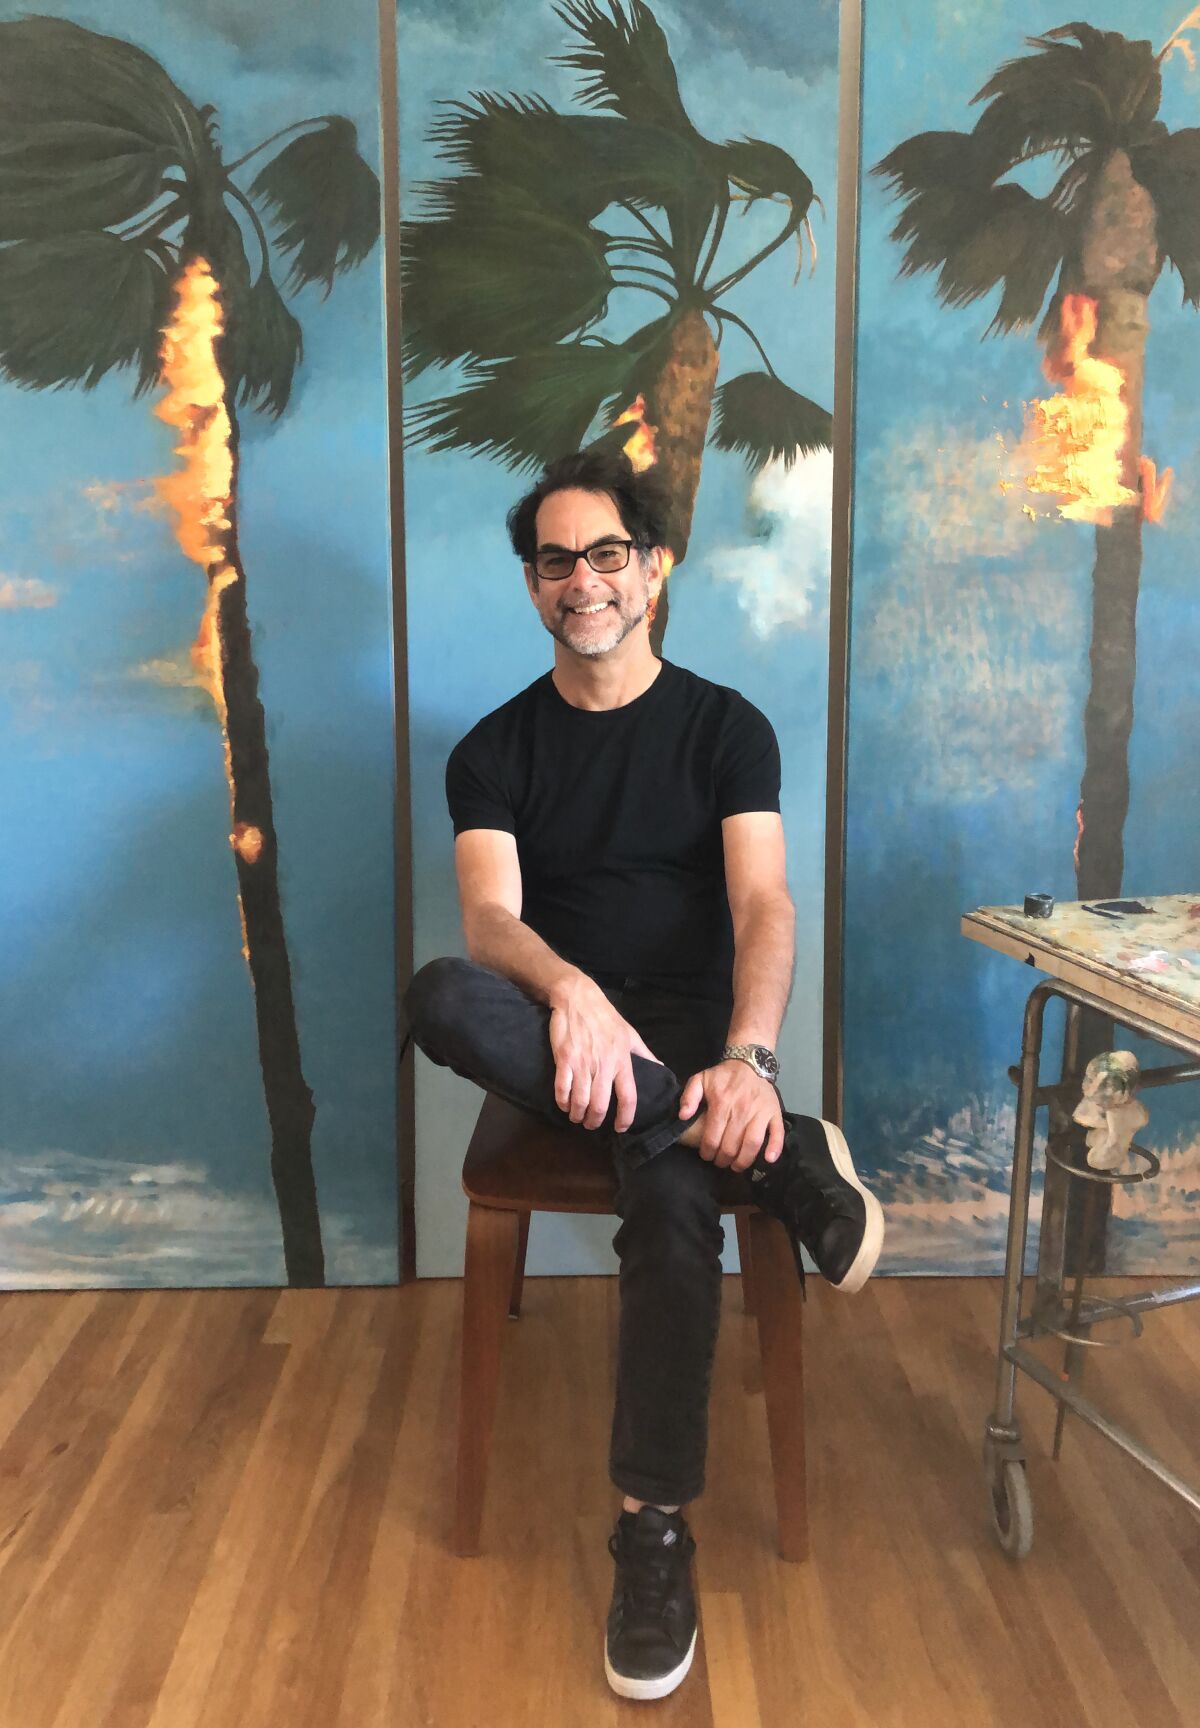 Artist Perry Vásquez sitting in front of his painting of burning palm trees